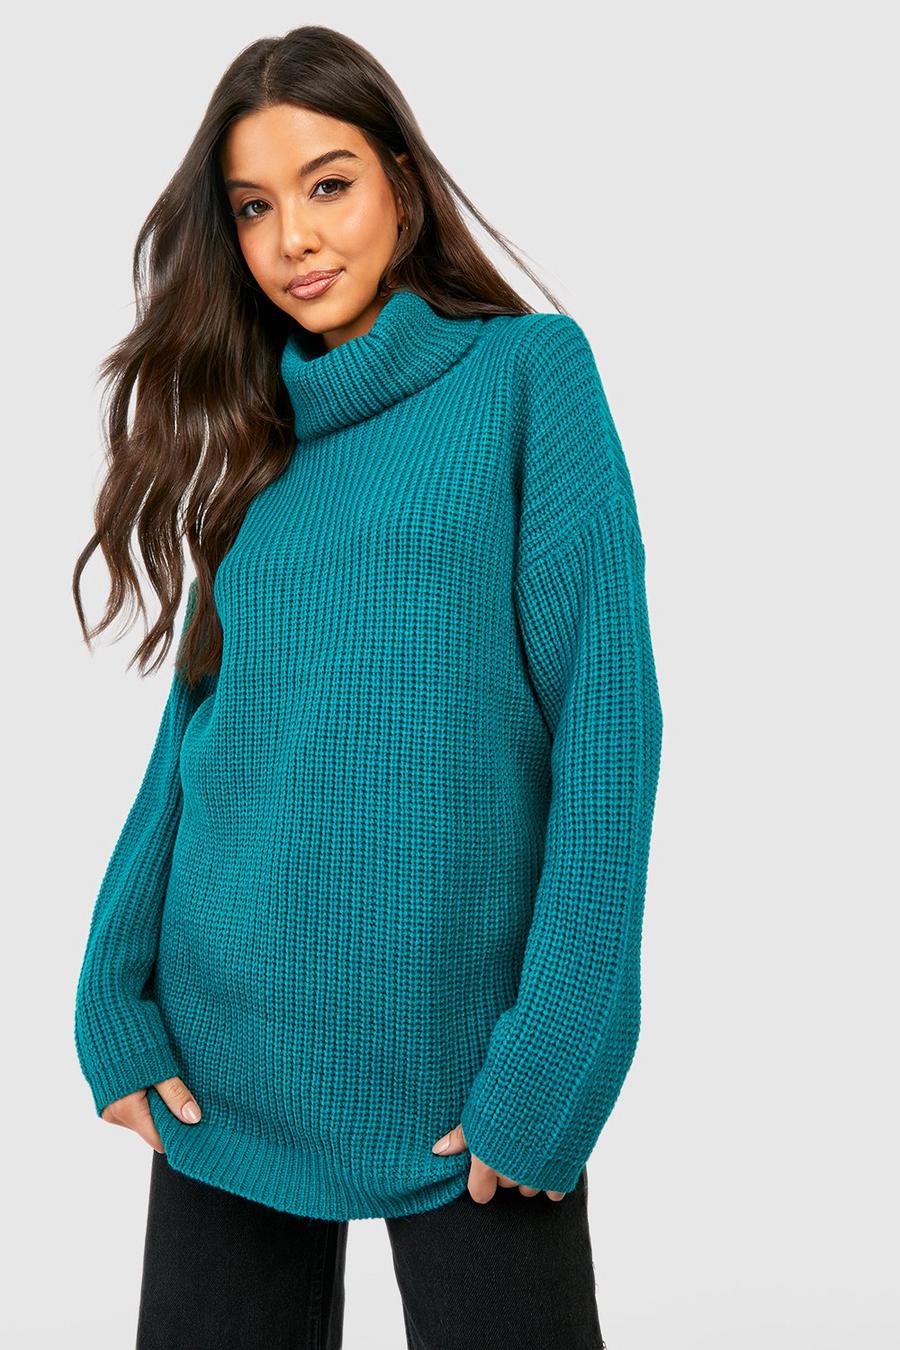 Teal Oversized Turtleneck Knitted Sweater